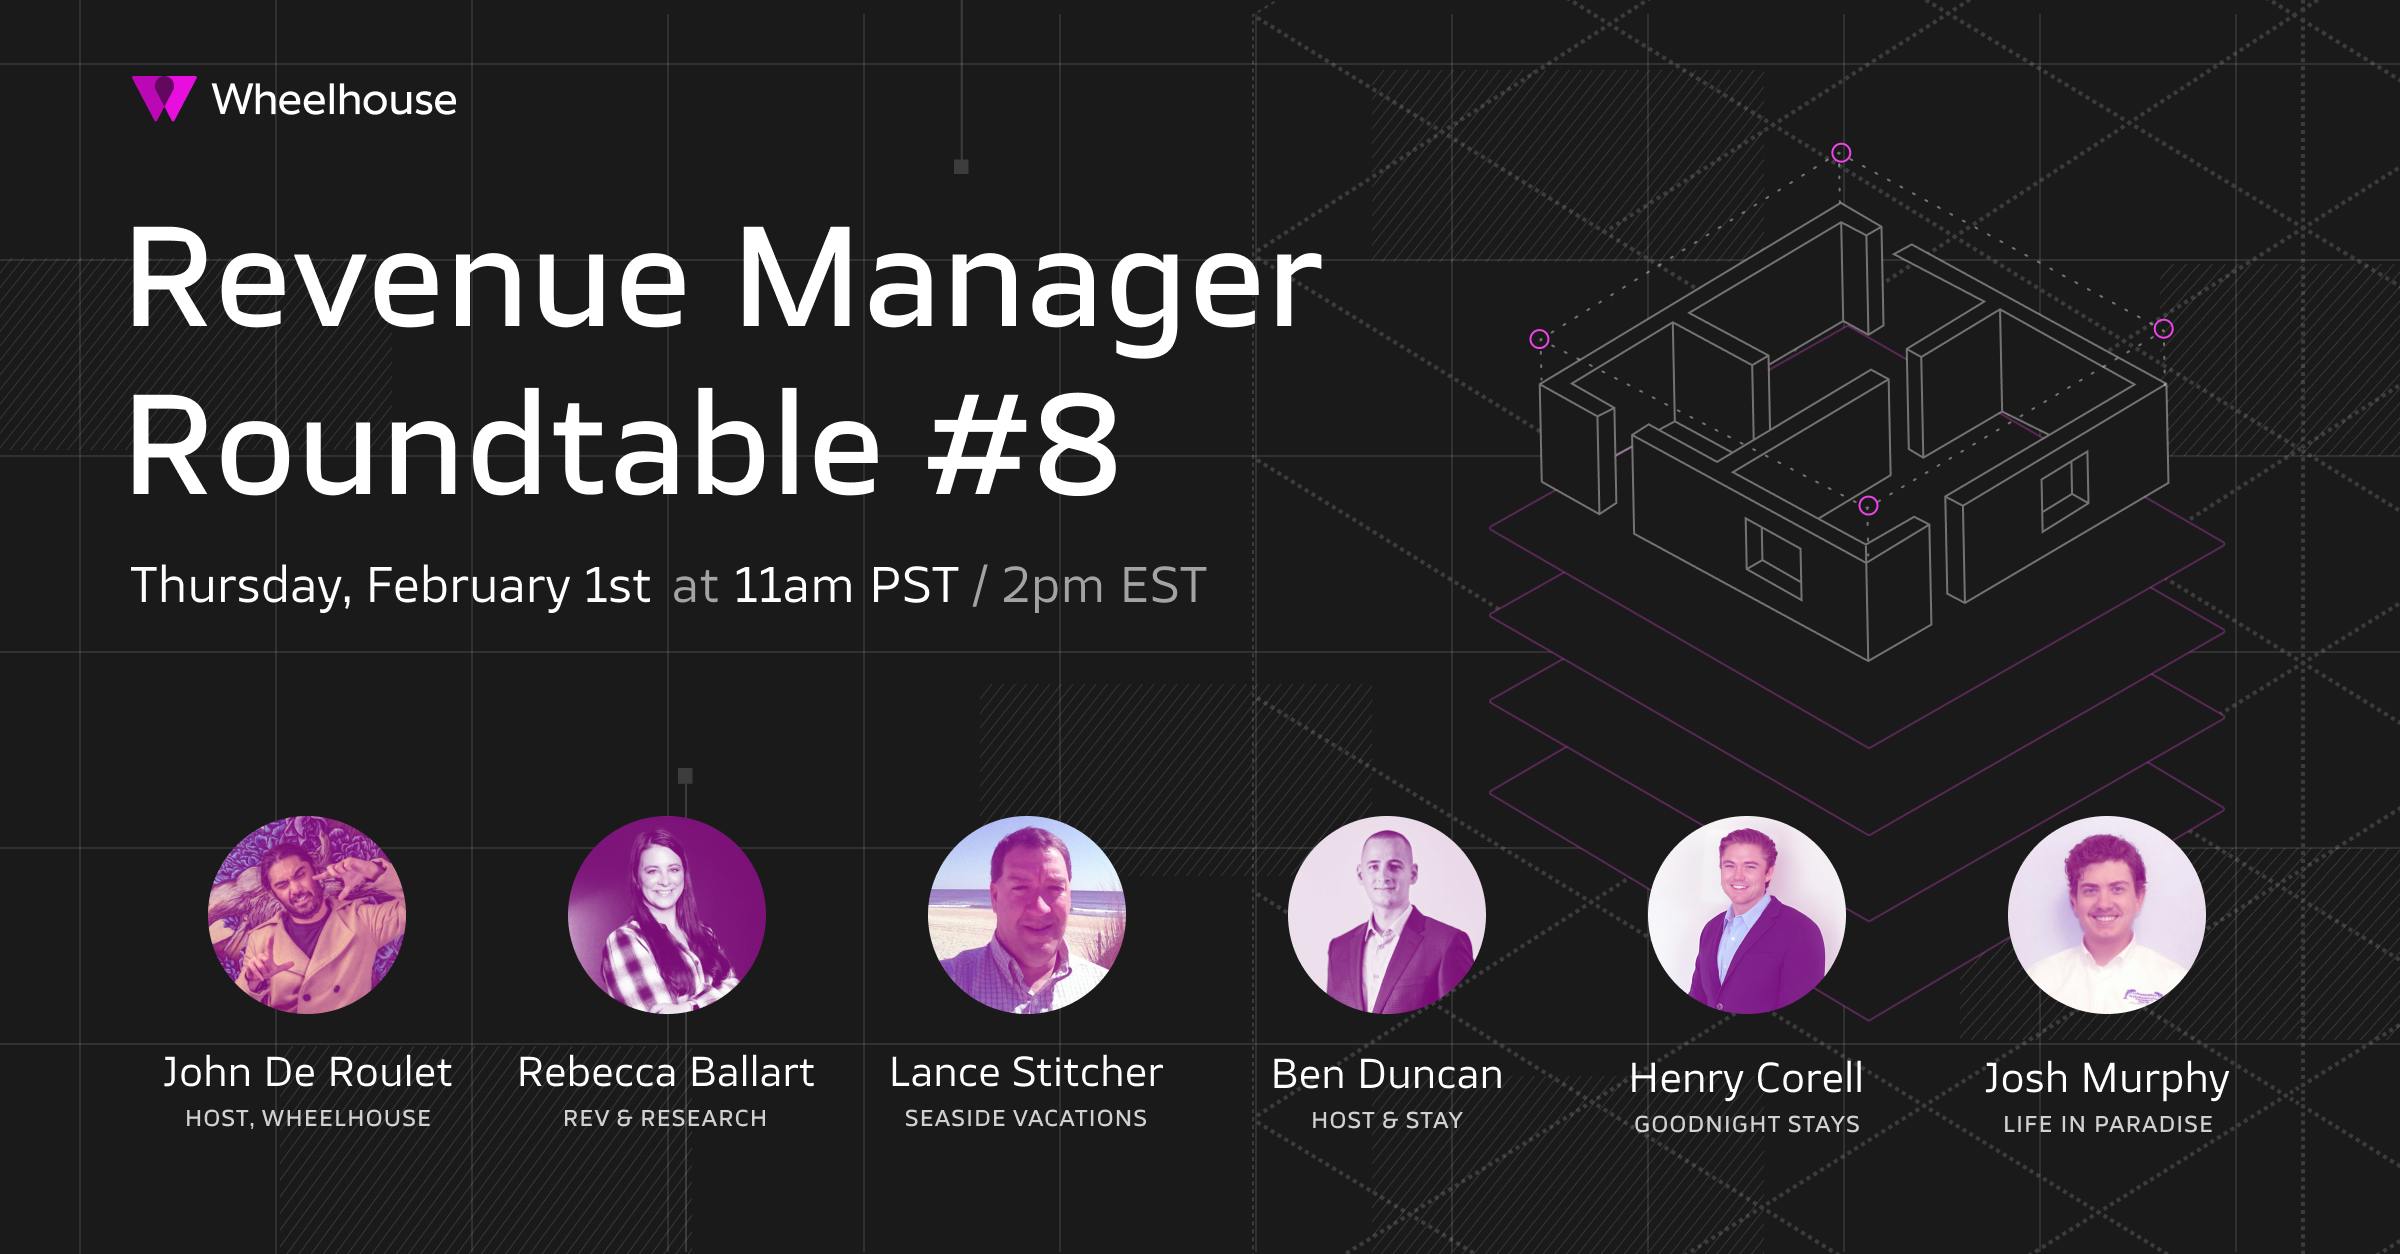 Revenue manager roundtable 8